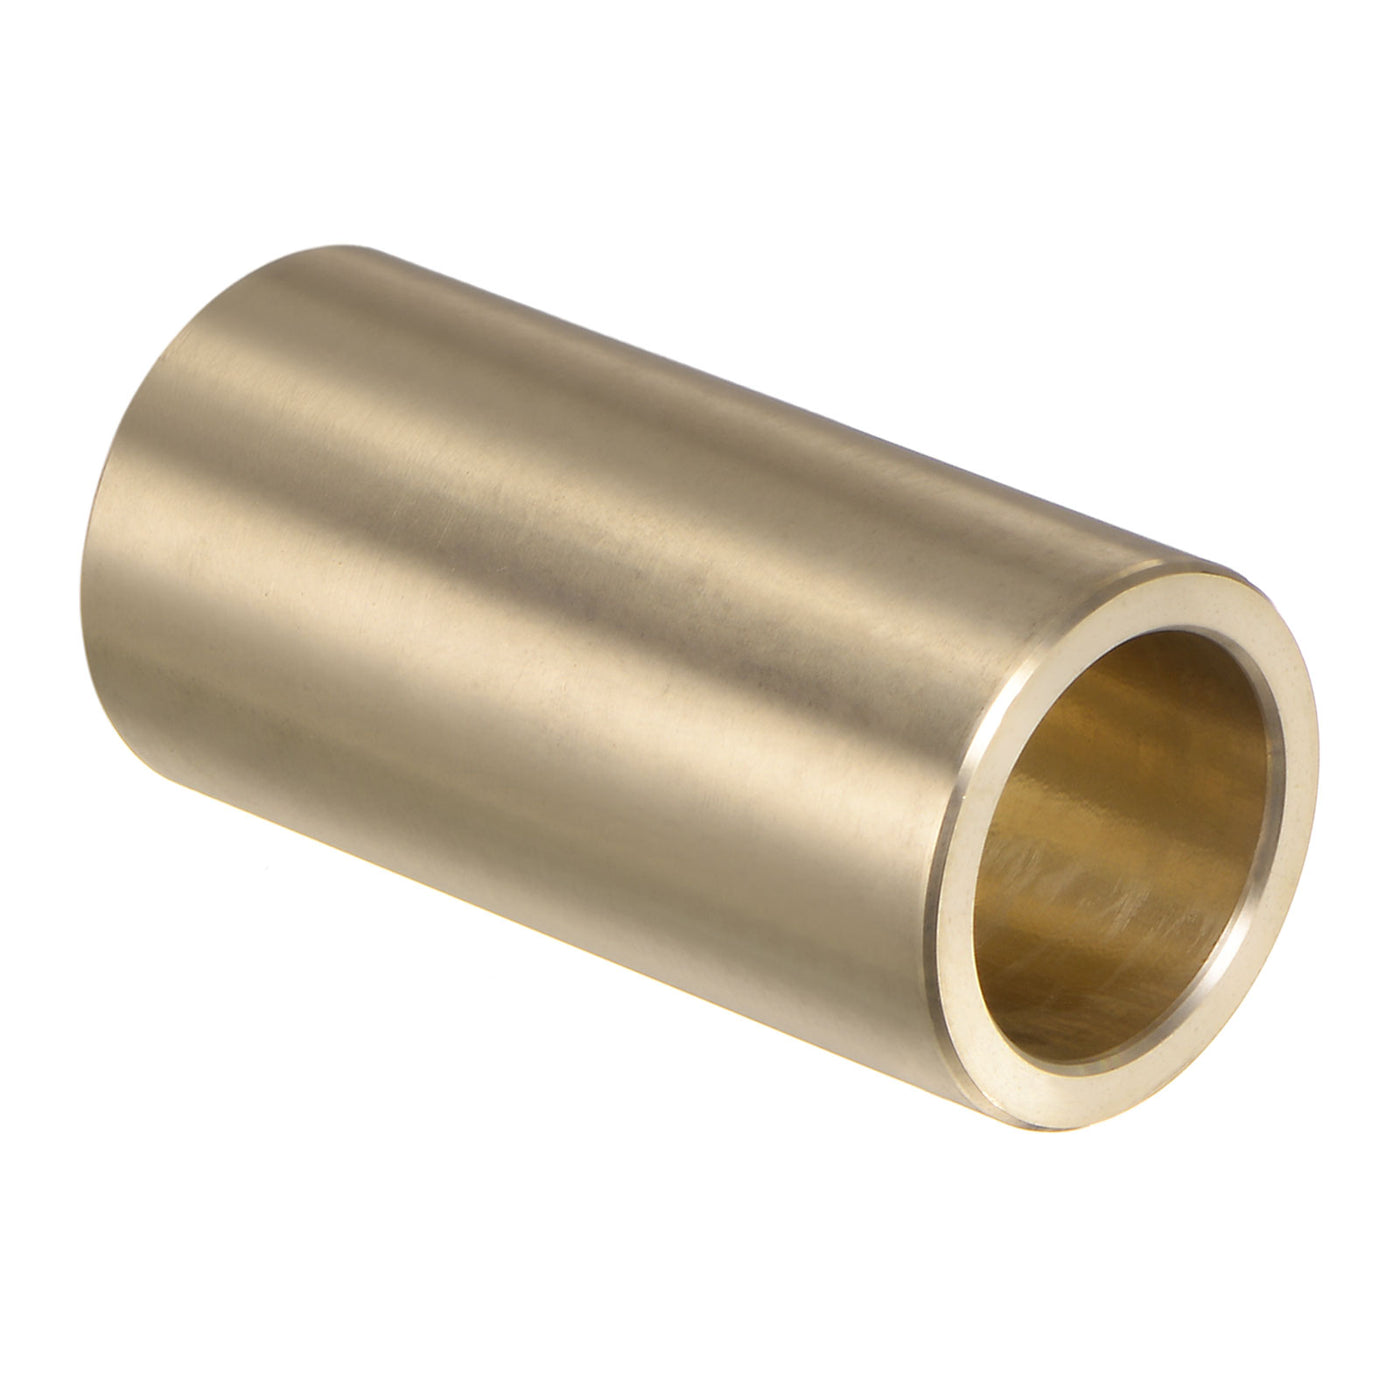 uxcell Uxcell Sleeve Bearings 3/4" x 1" x 2" Wrapped Oilless Bushings Cast Brass